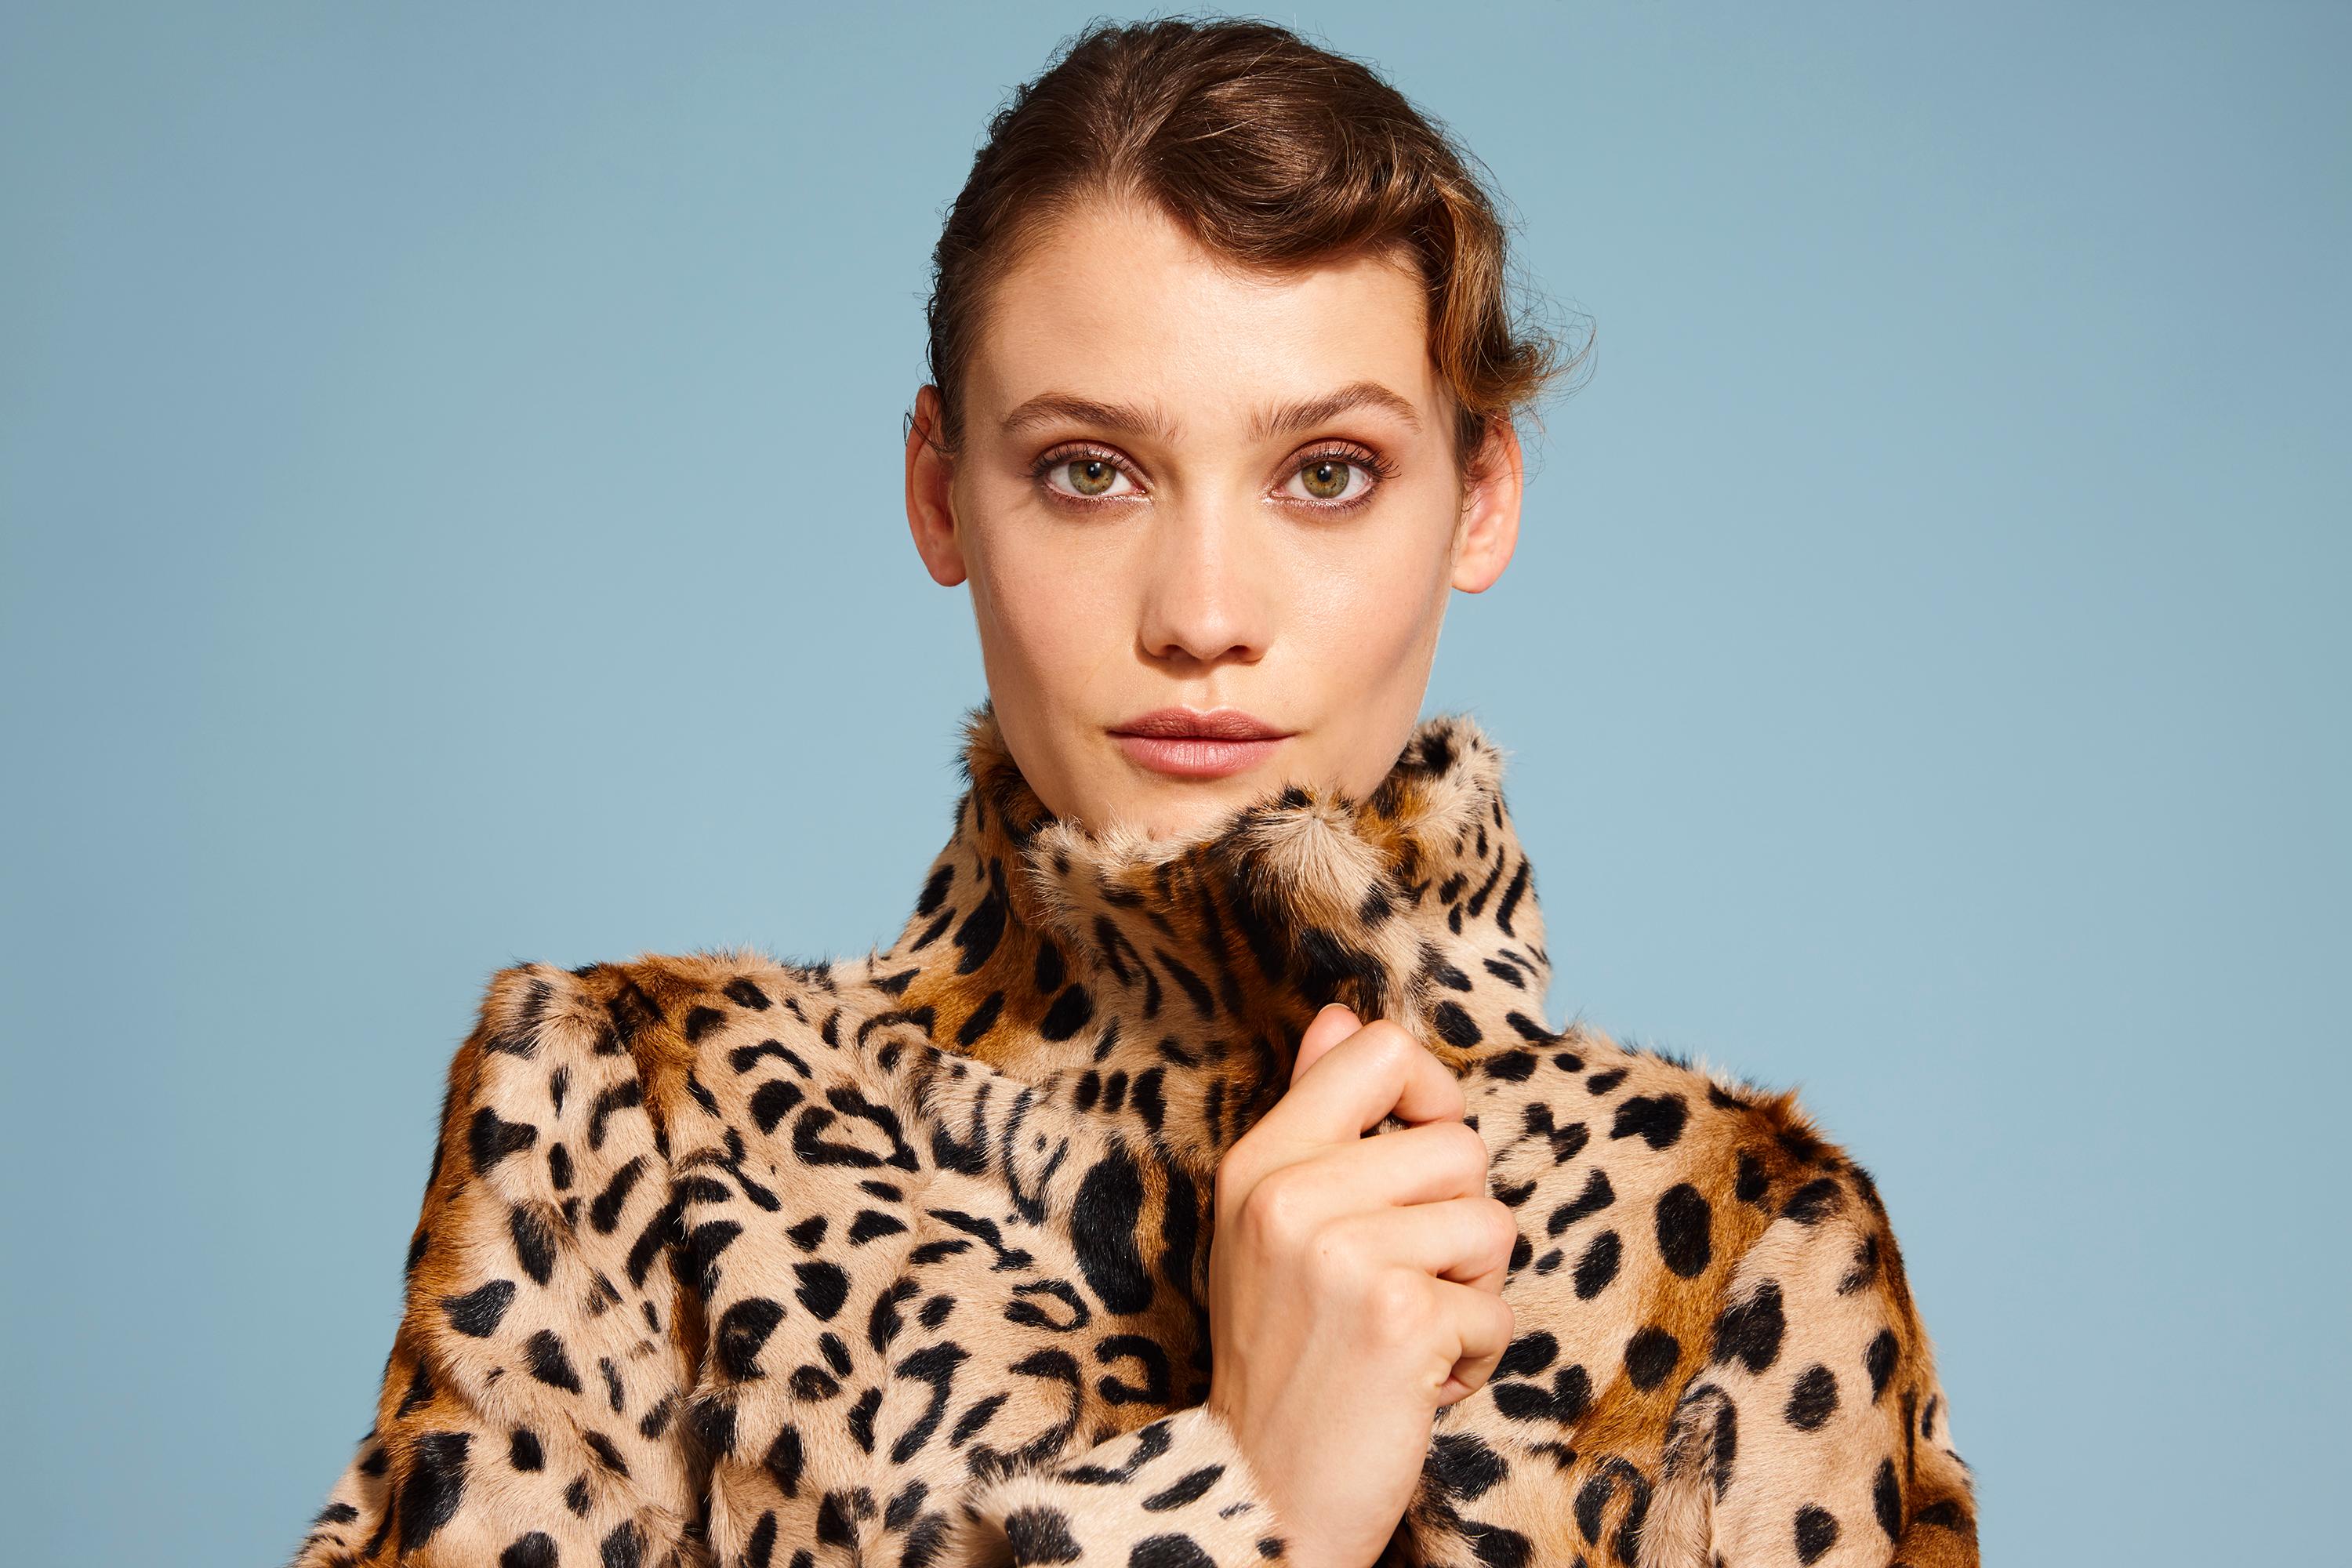 This Leopard print coat is Verheyen London’s classic staple for effortless style and glamour.

A coat for dressing up and down with jeans or a dress.

PRODUCT DETAILS

High Collar Leopard Print Coat

Size: UK 10
Colour: Natural

Dyed Printed Goat